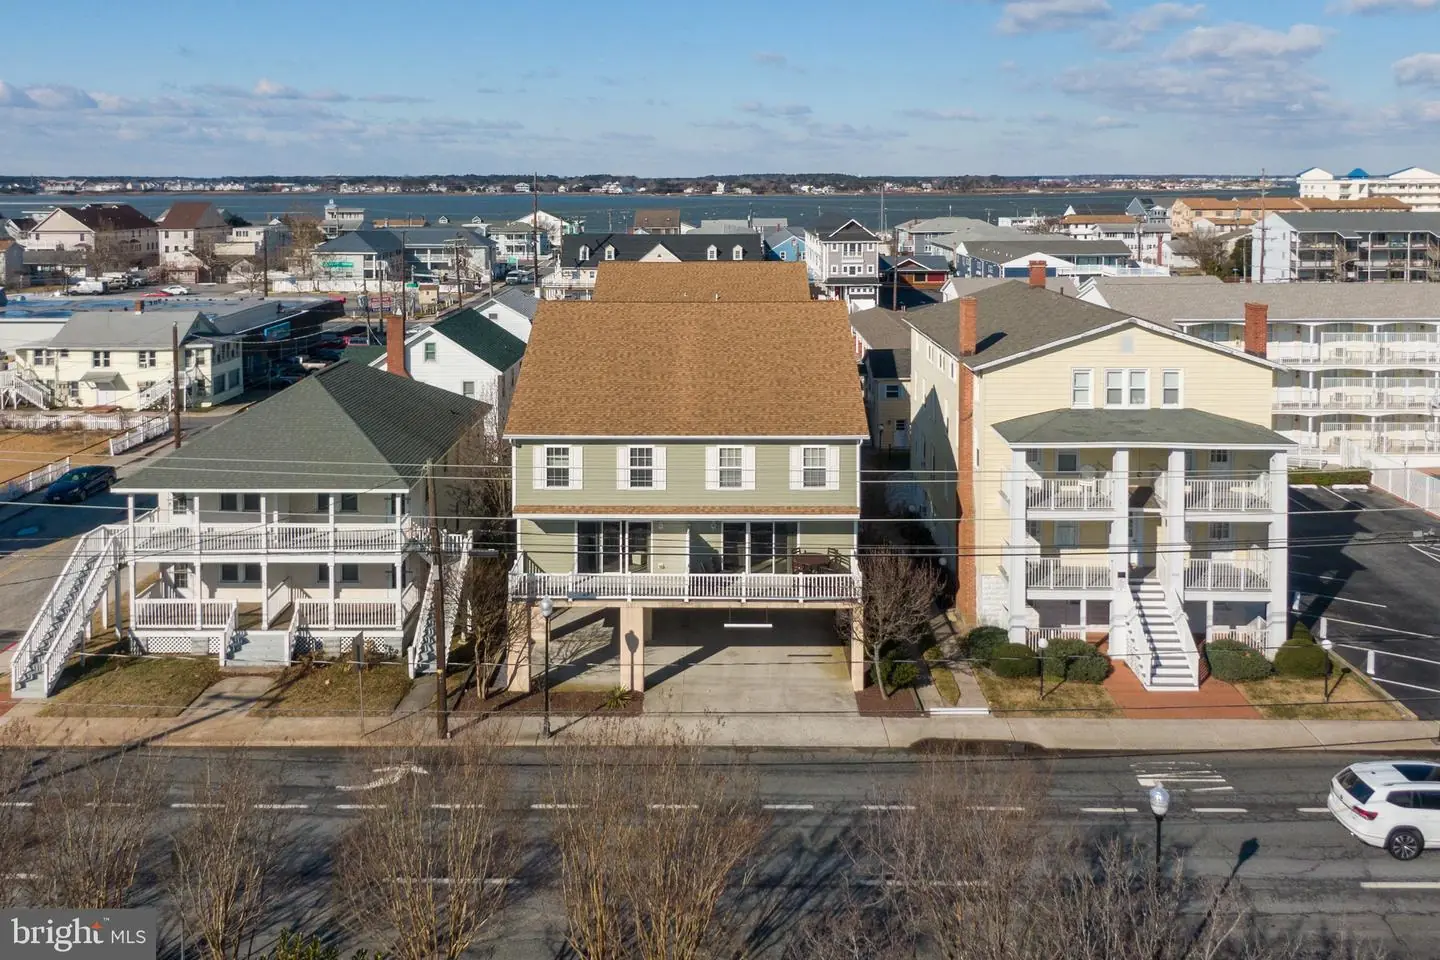 MDWO2018142-802789296990-2023-12-31-08-19-42 803 N Baltimore Ave #a | Ocean City, MD Real Estate For Sale | MLS# Mdwo2018142  - 1st Choice Properties